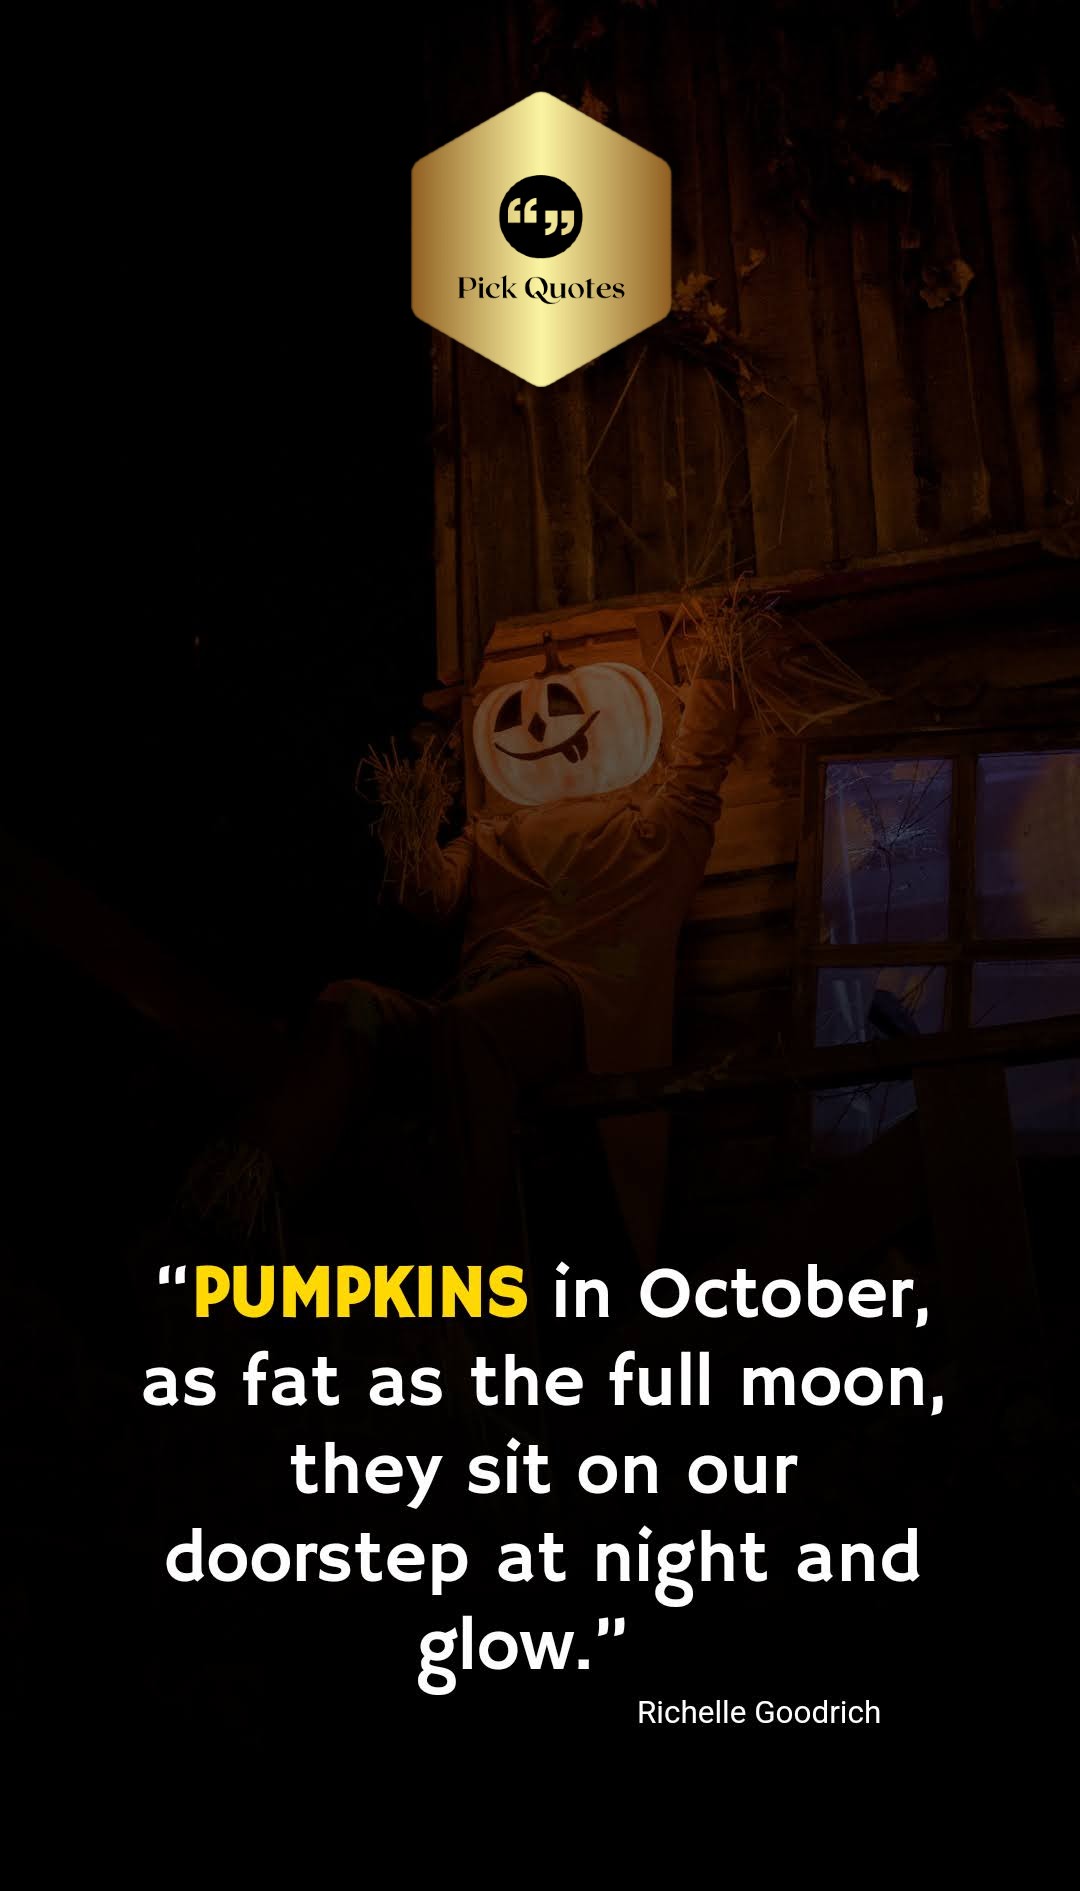 Best short Halloween Quotes From-Movies-thepickquotes.com